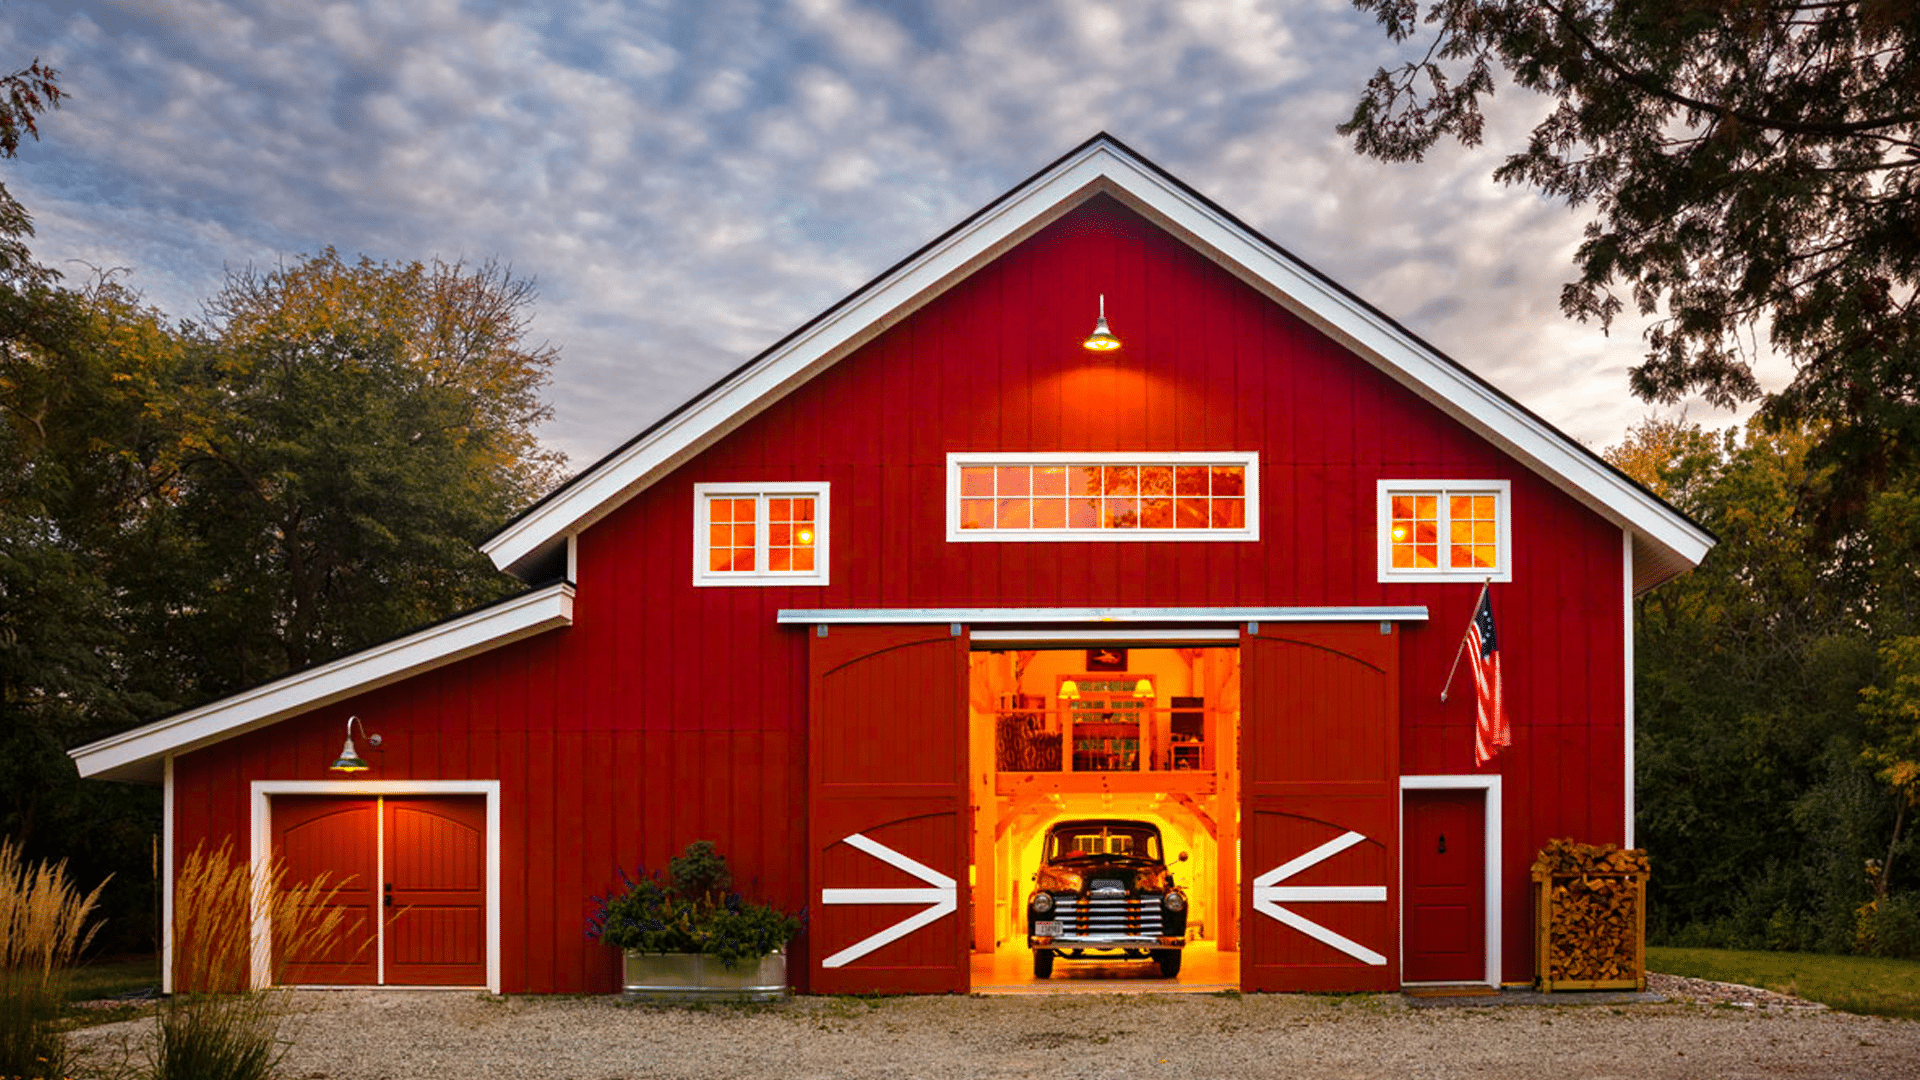 Red Metal Barn from Outdoor Options in Eatonton Georgia